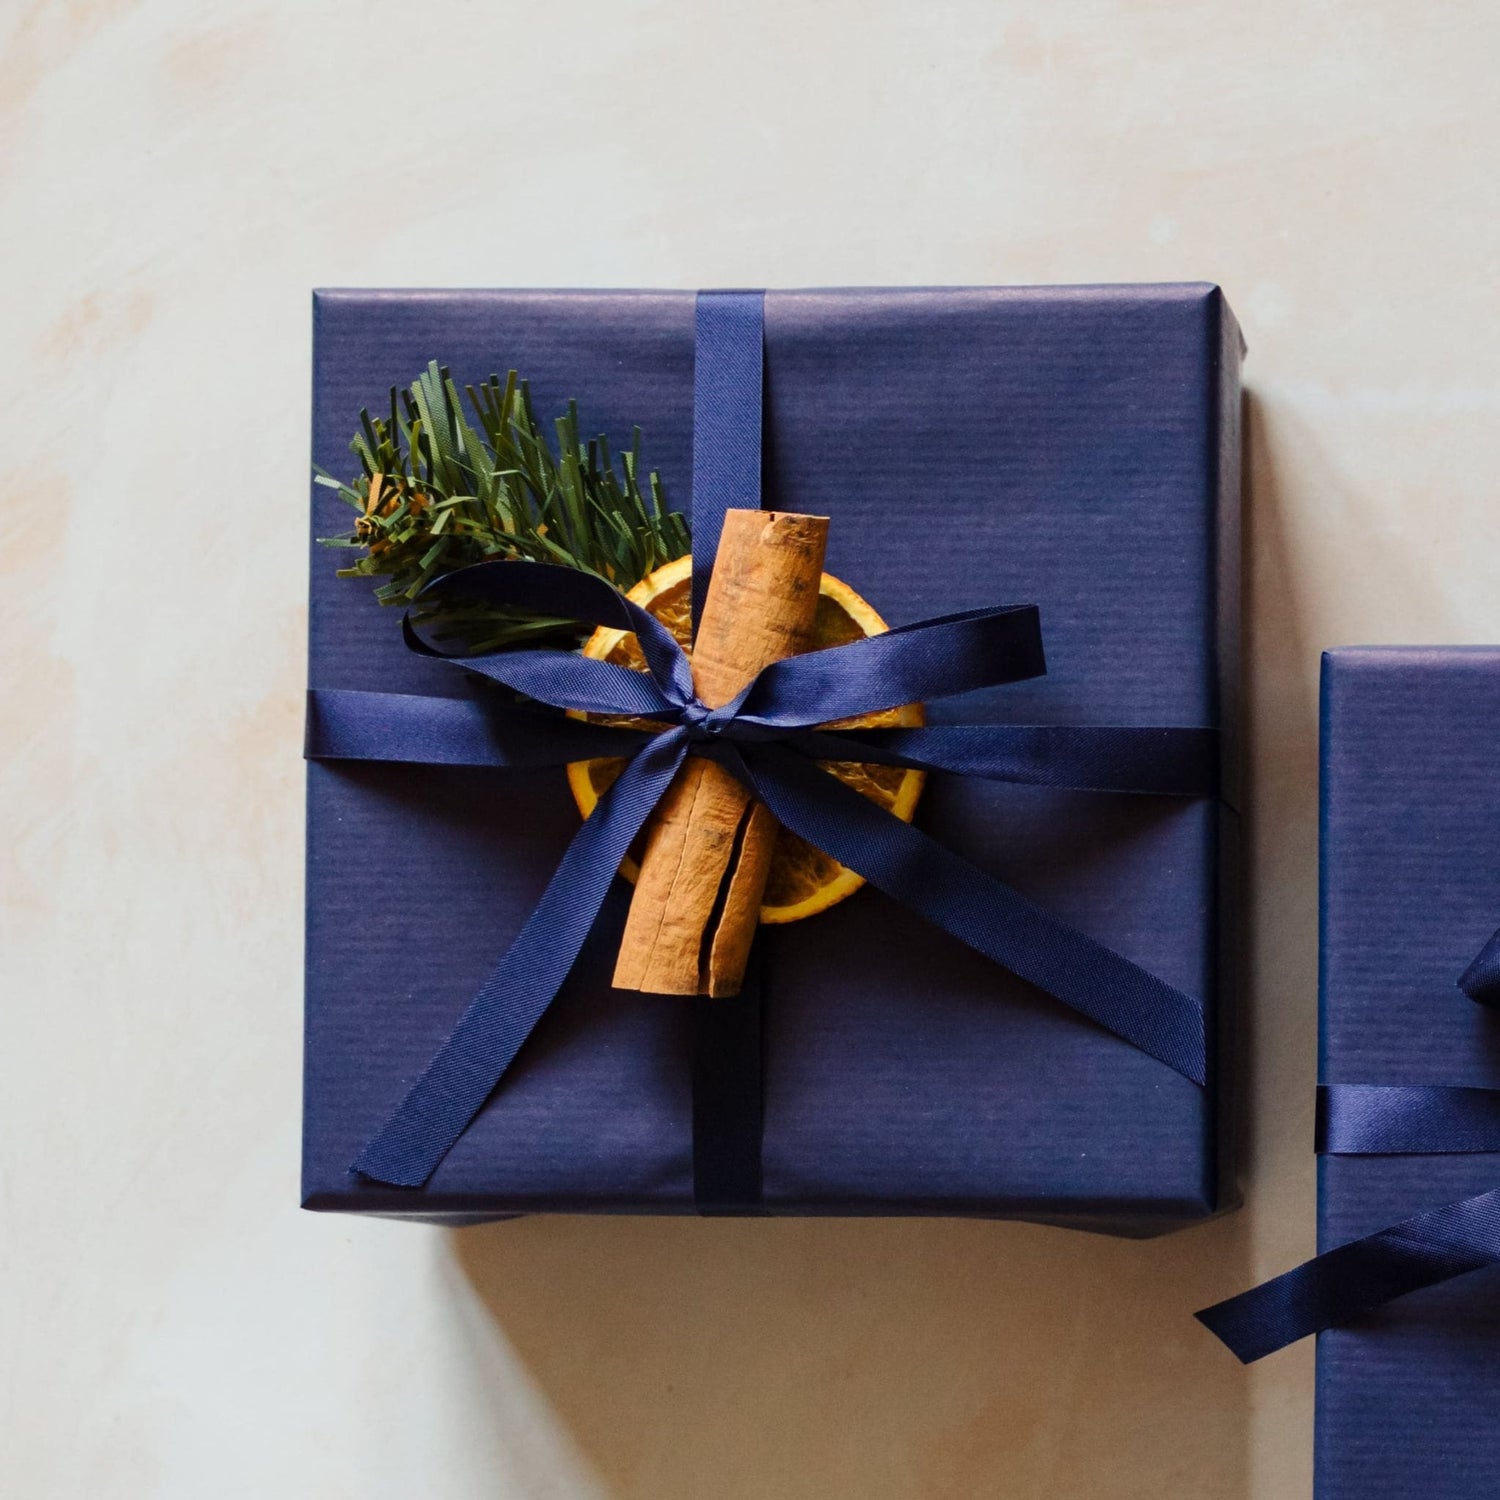 A 400g coastal 3 wick soy candle from the Home County Co. is shown with luxury Christmas Gift Wrap. The 3 wick candle is wrapped in luxury navy wrapping paper secured with navy ribbon and Christmas embellishments.